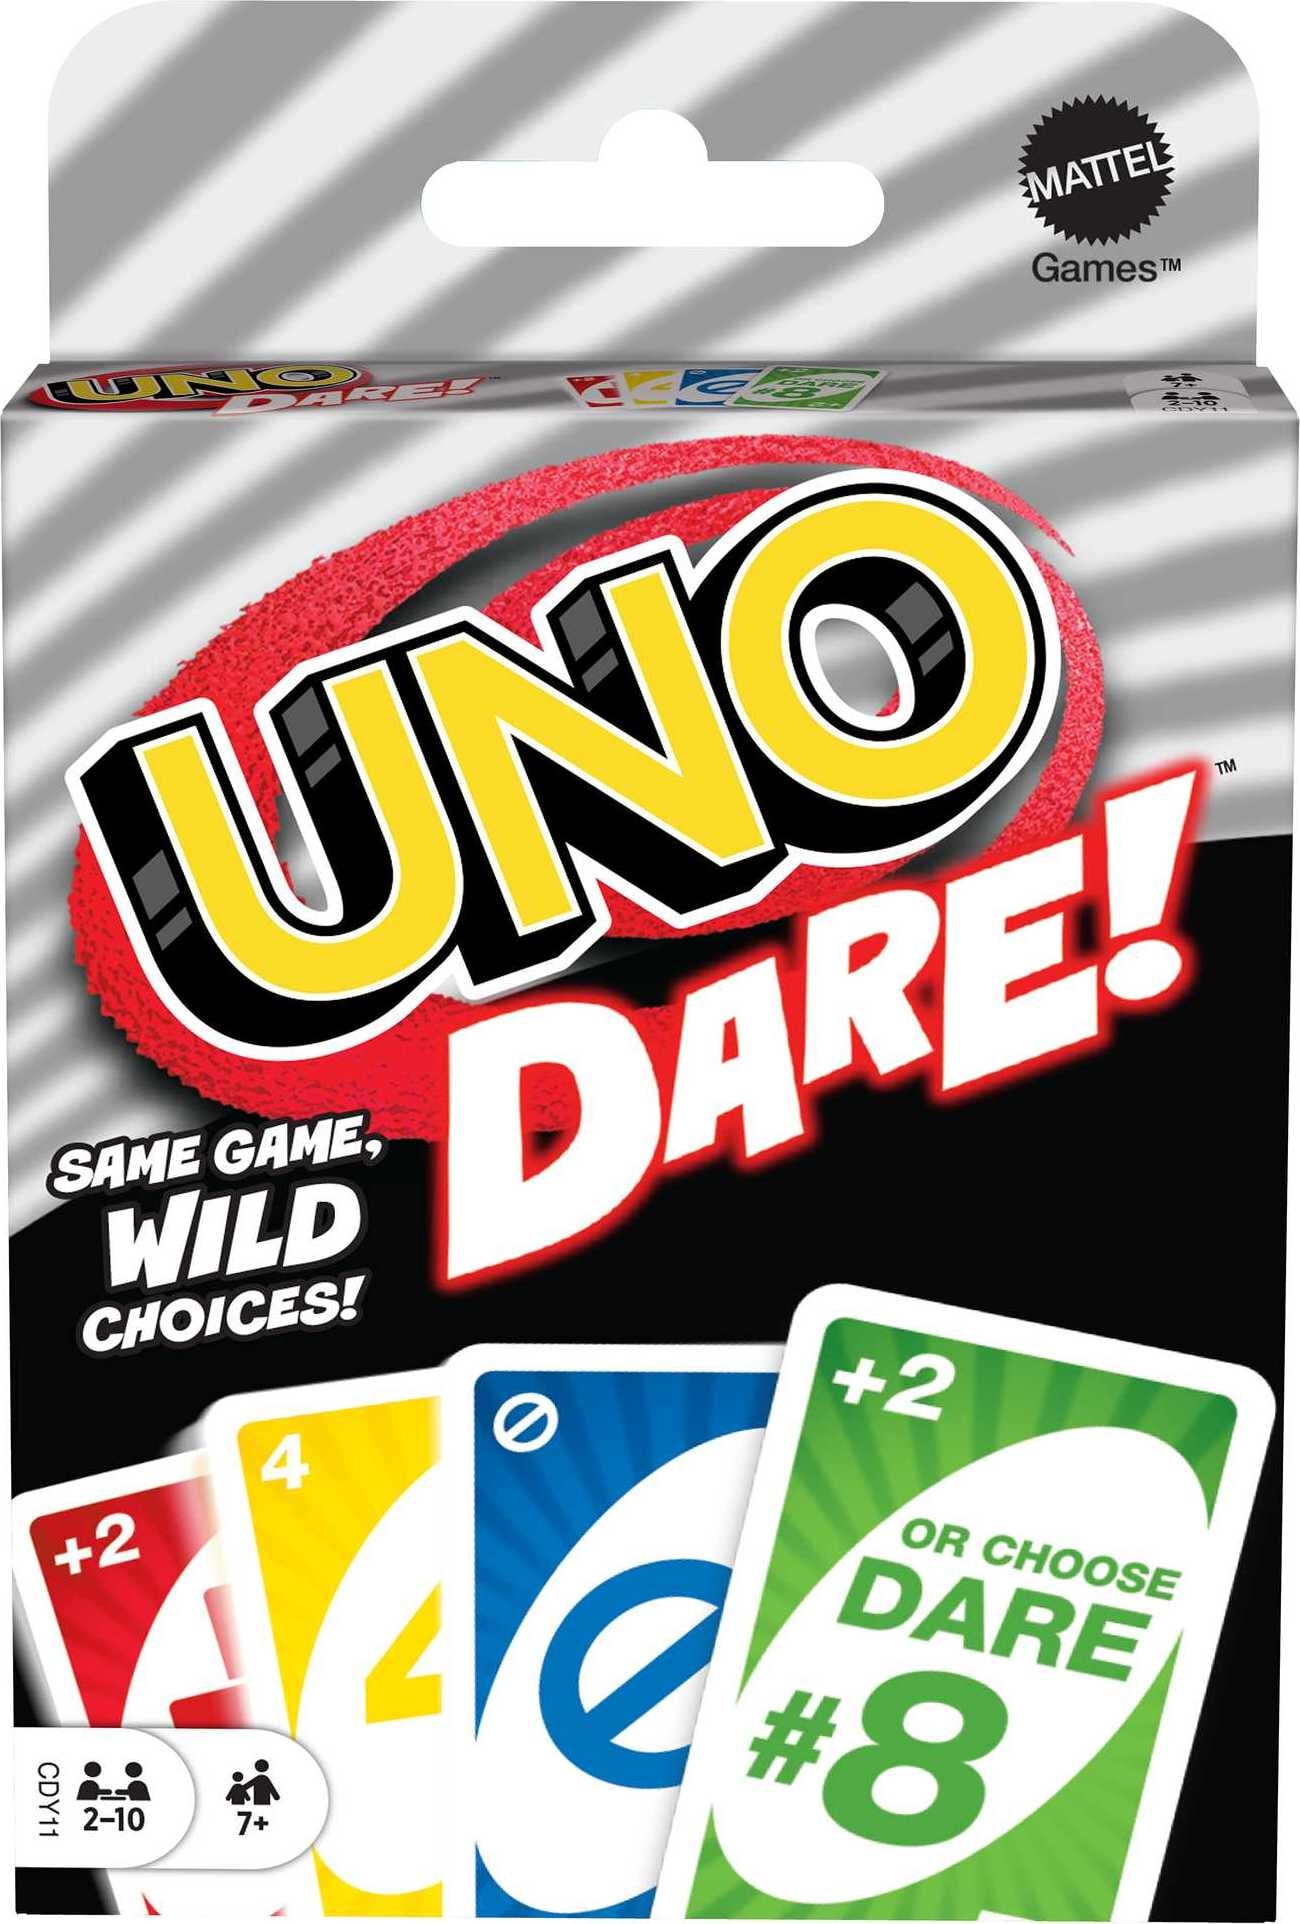 UNO Dare Card Game for Family Night Featuring Challenging and Silly Dares From 3 Categories